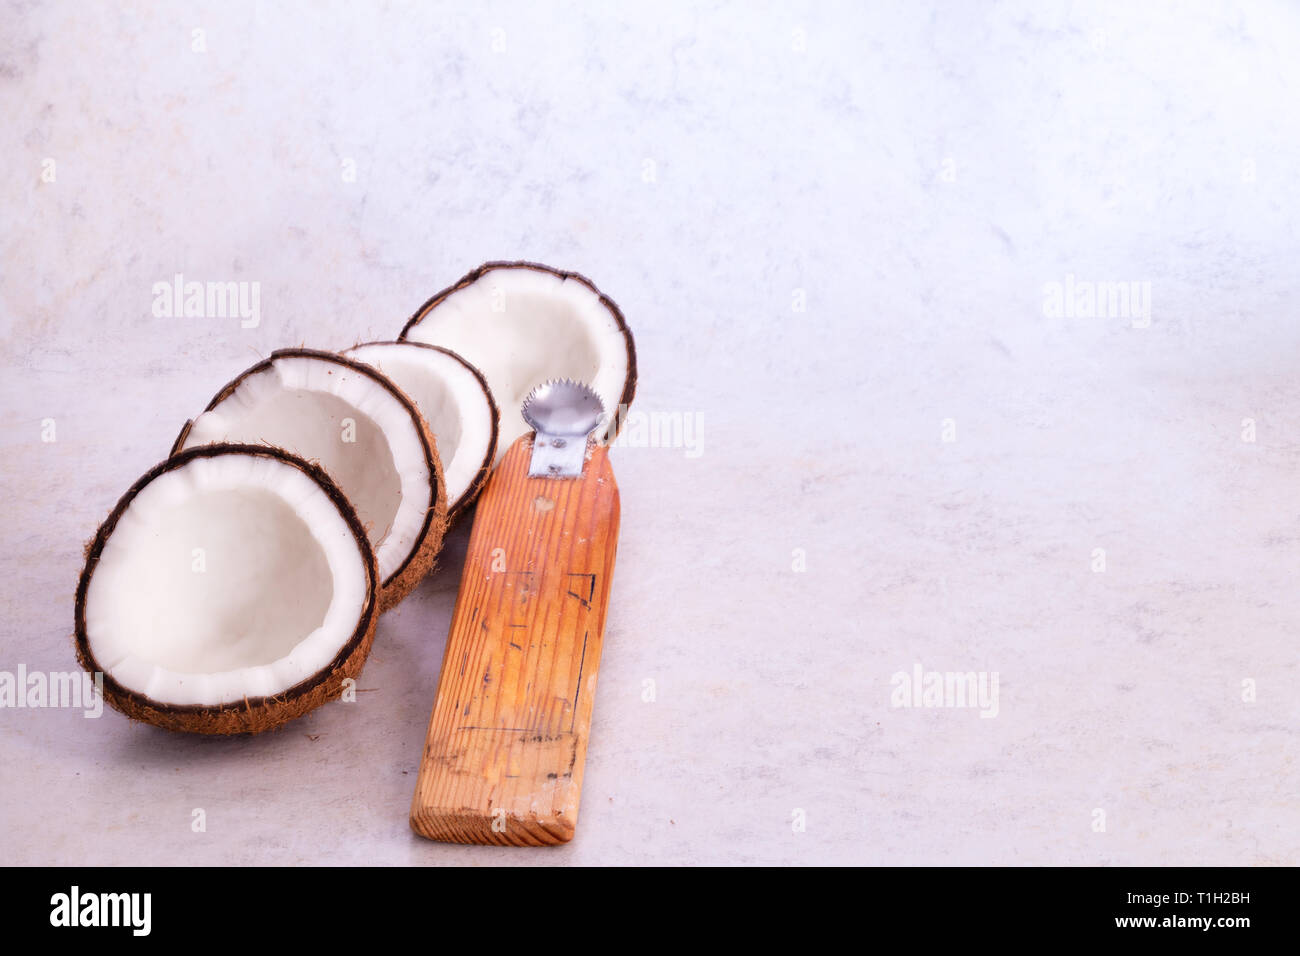 Dry coconut with with textured background. Stock Photo